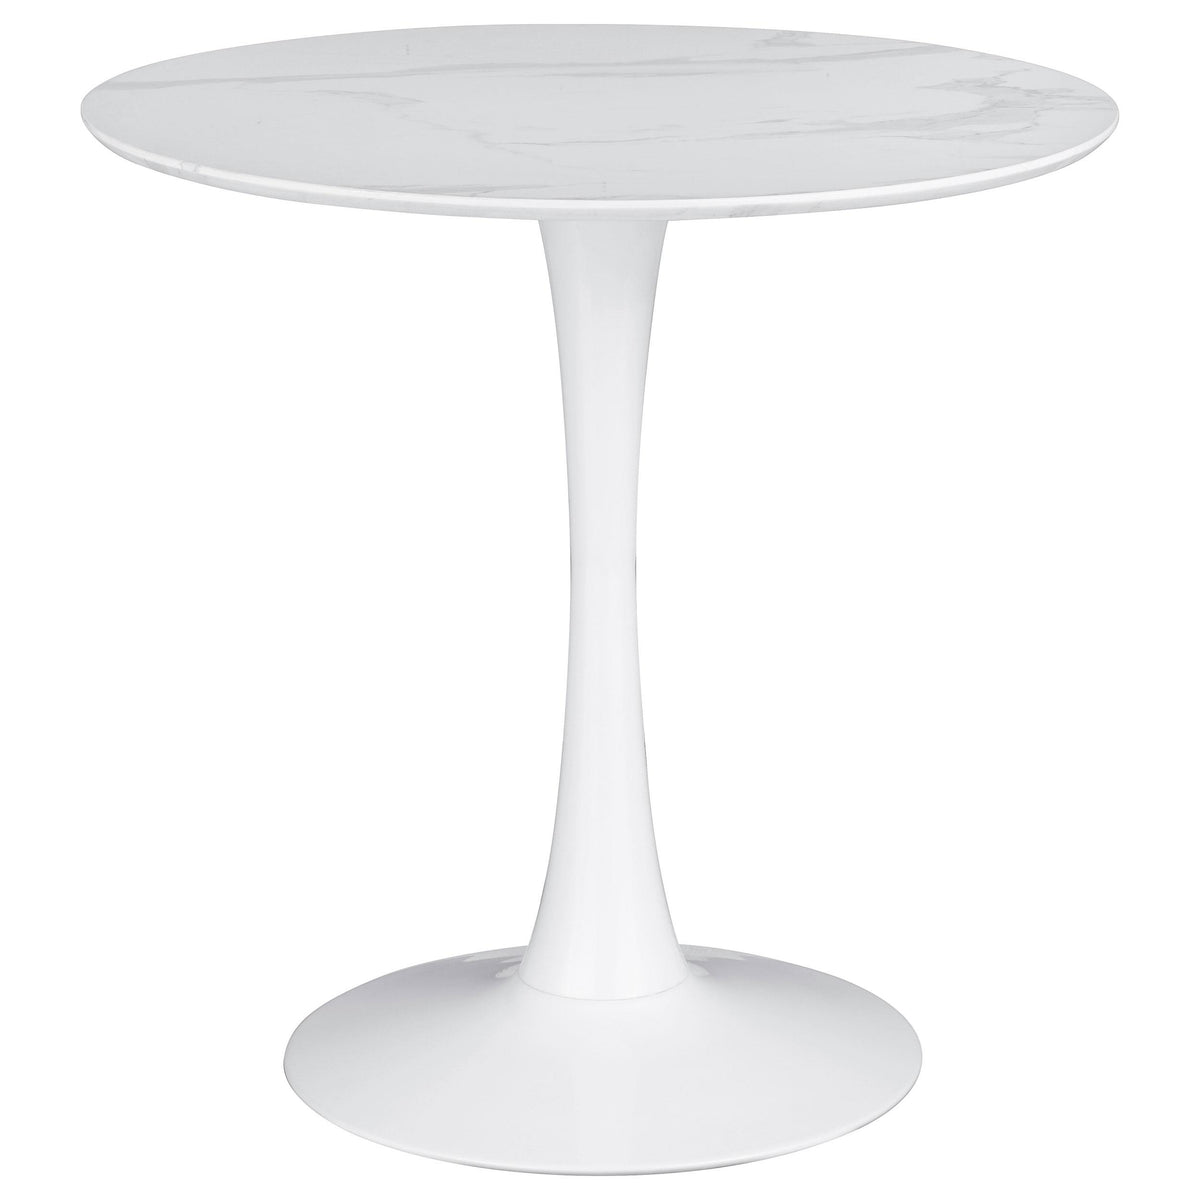 Arkell 30-inch Round Pedestal Dining Table White Arkell 30-inch Round Pedestal Dining Table White Half Price Furniture